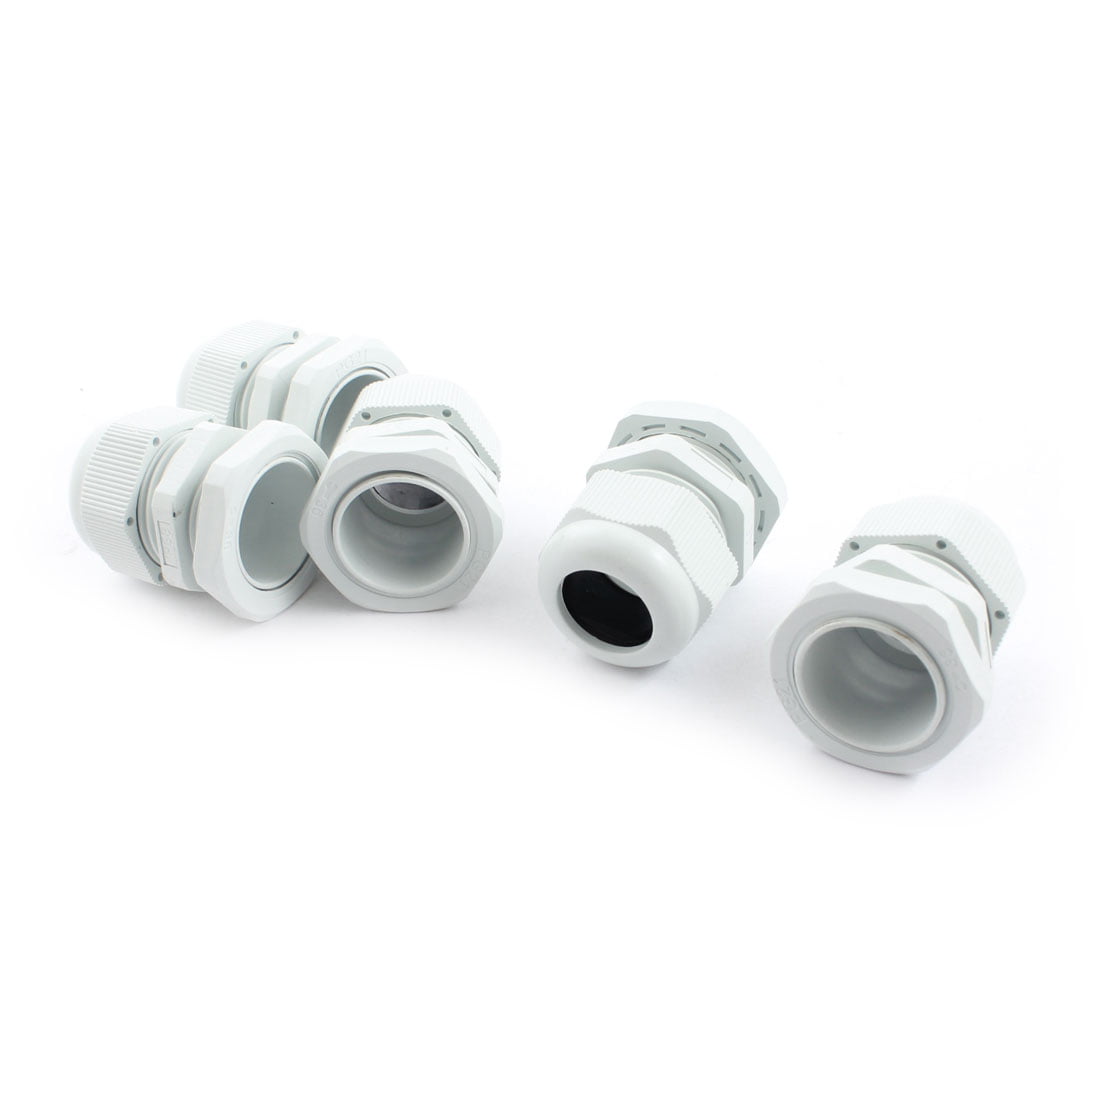 12pcs PG25 Black White Waterproof Connector Cable Gland for 16-21mm Dia Wire 